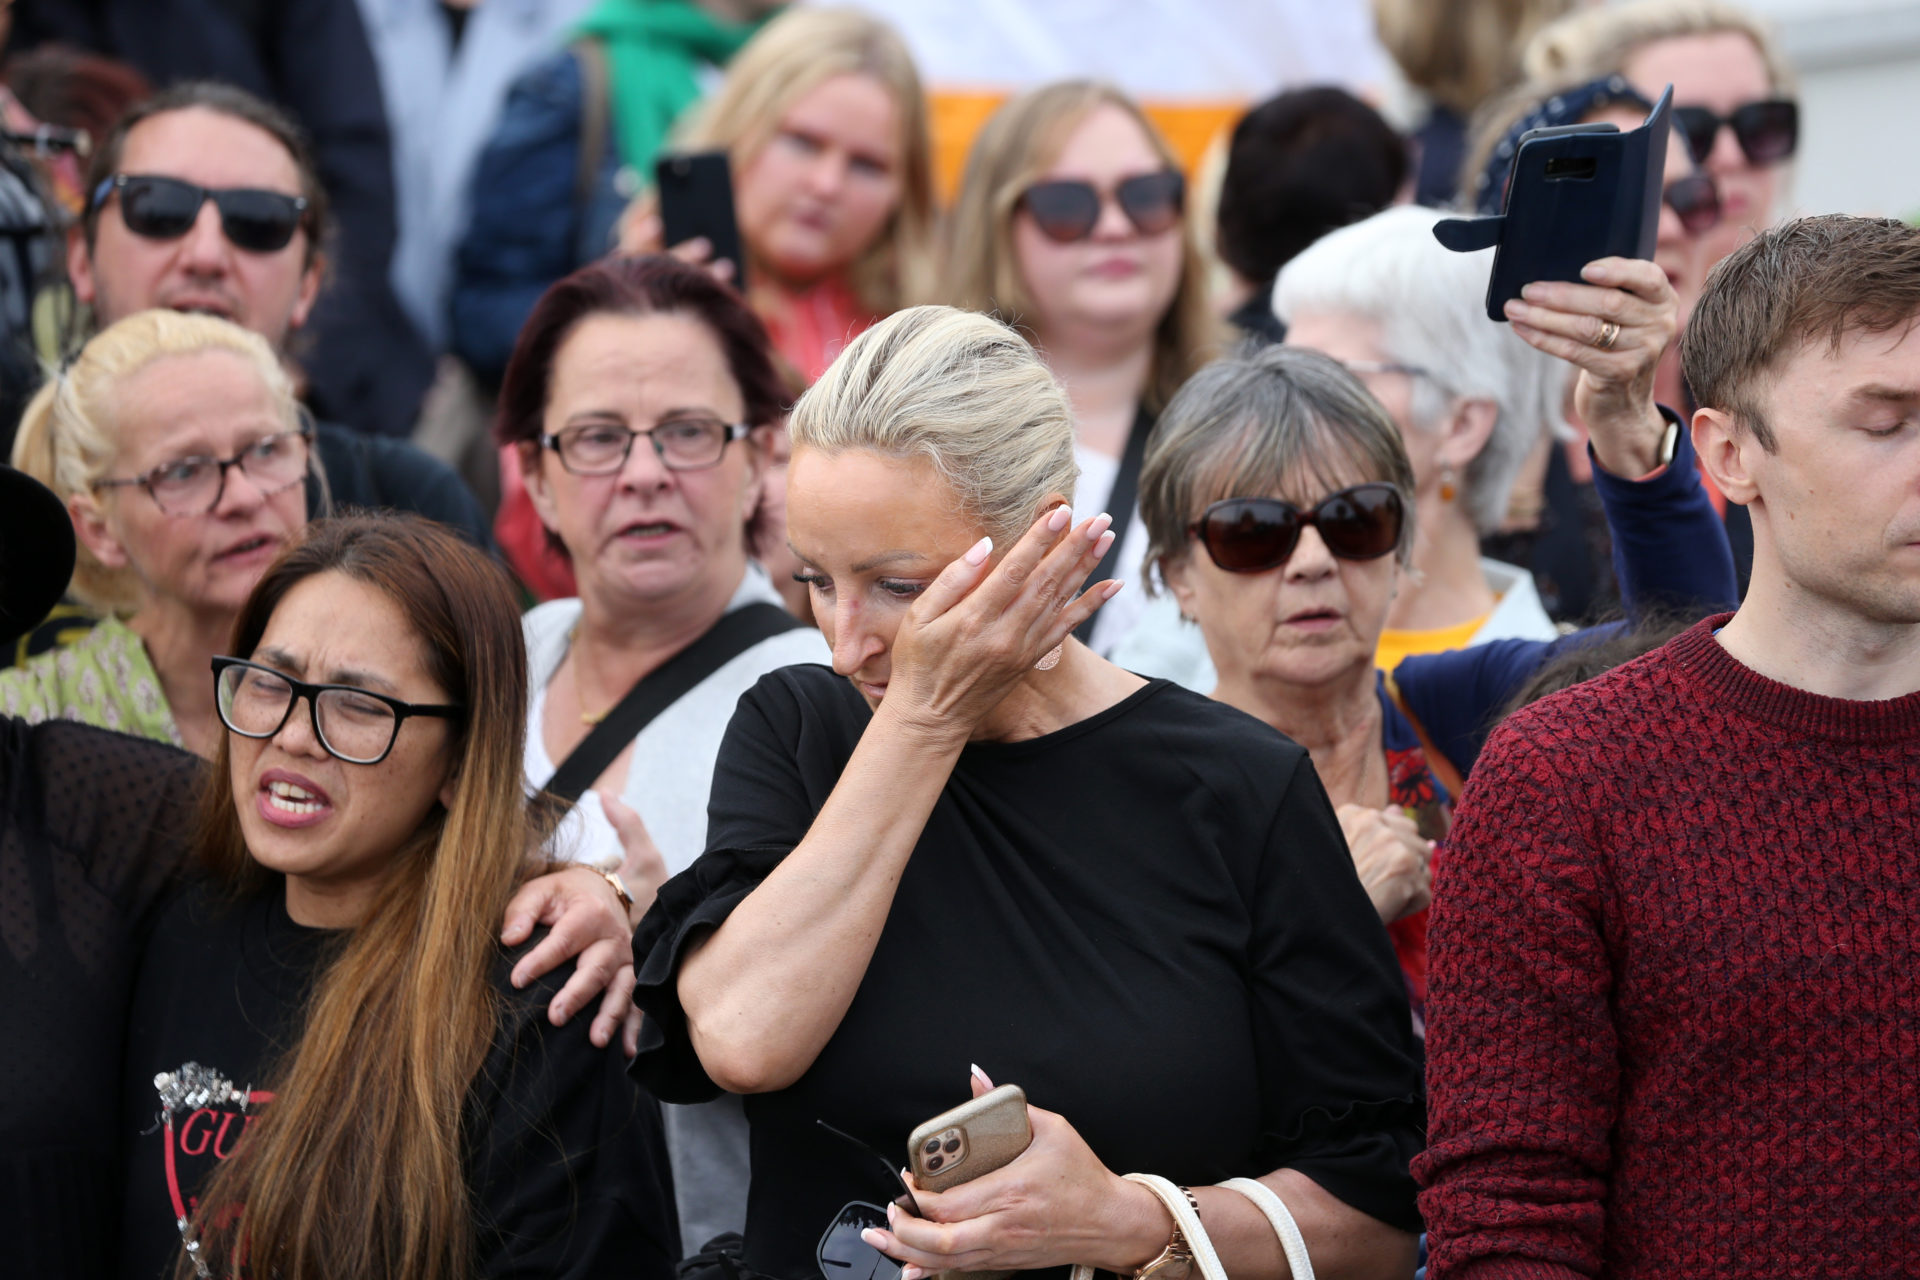 Upset and emotion in the crowd as people gather to say their goodbyes to Sinéad O’Connor